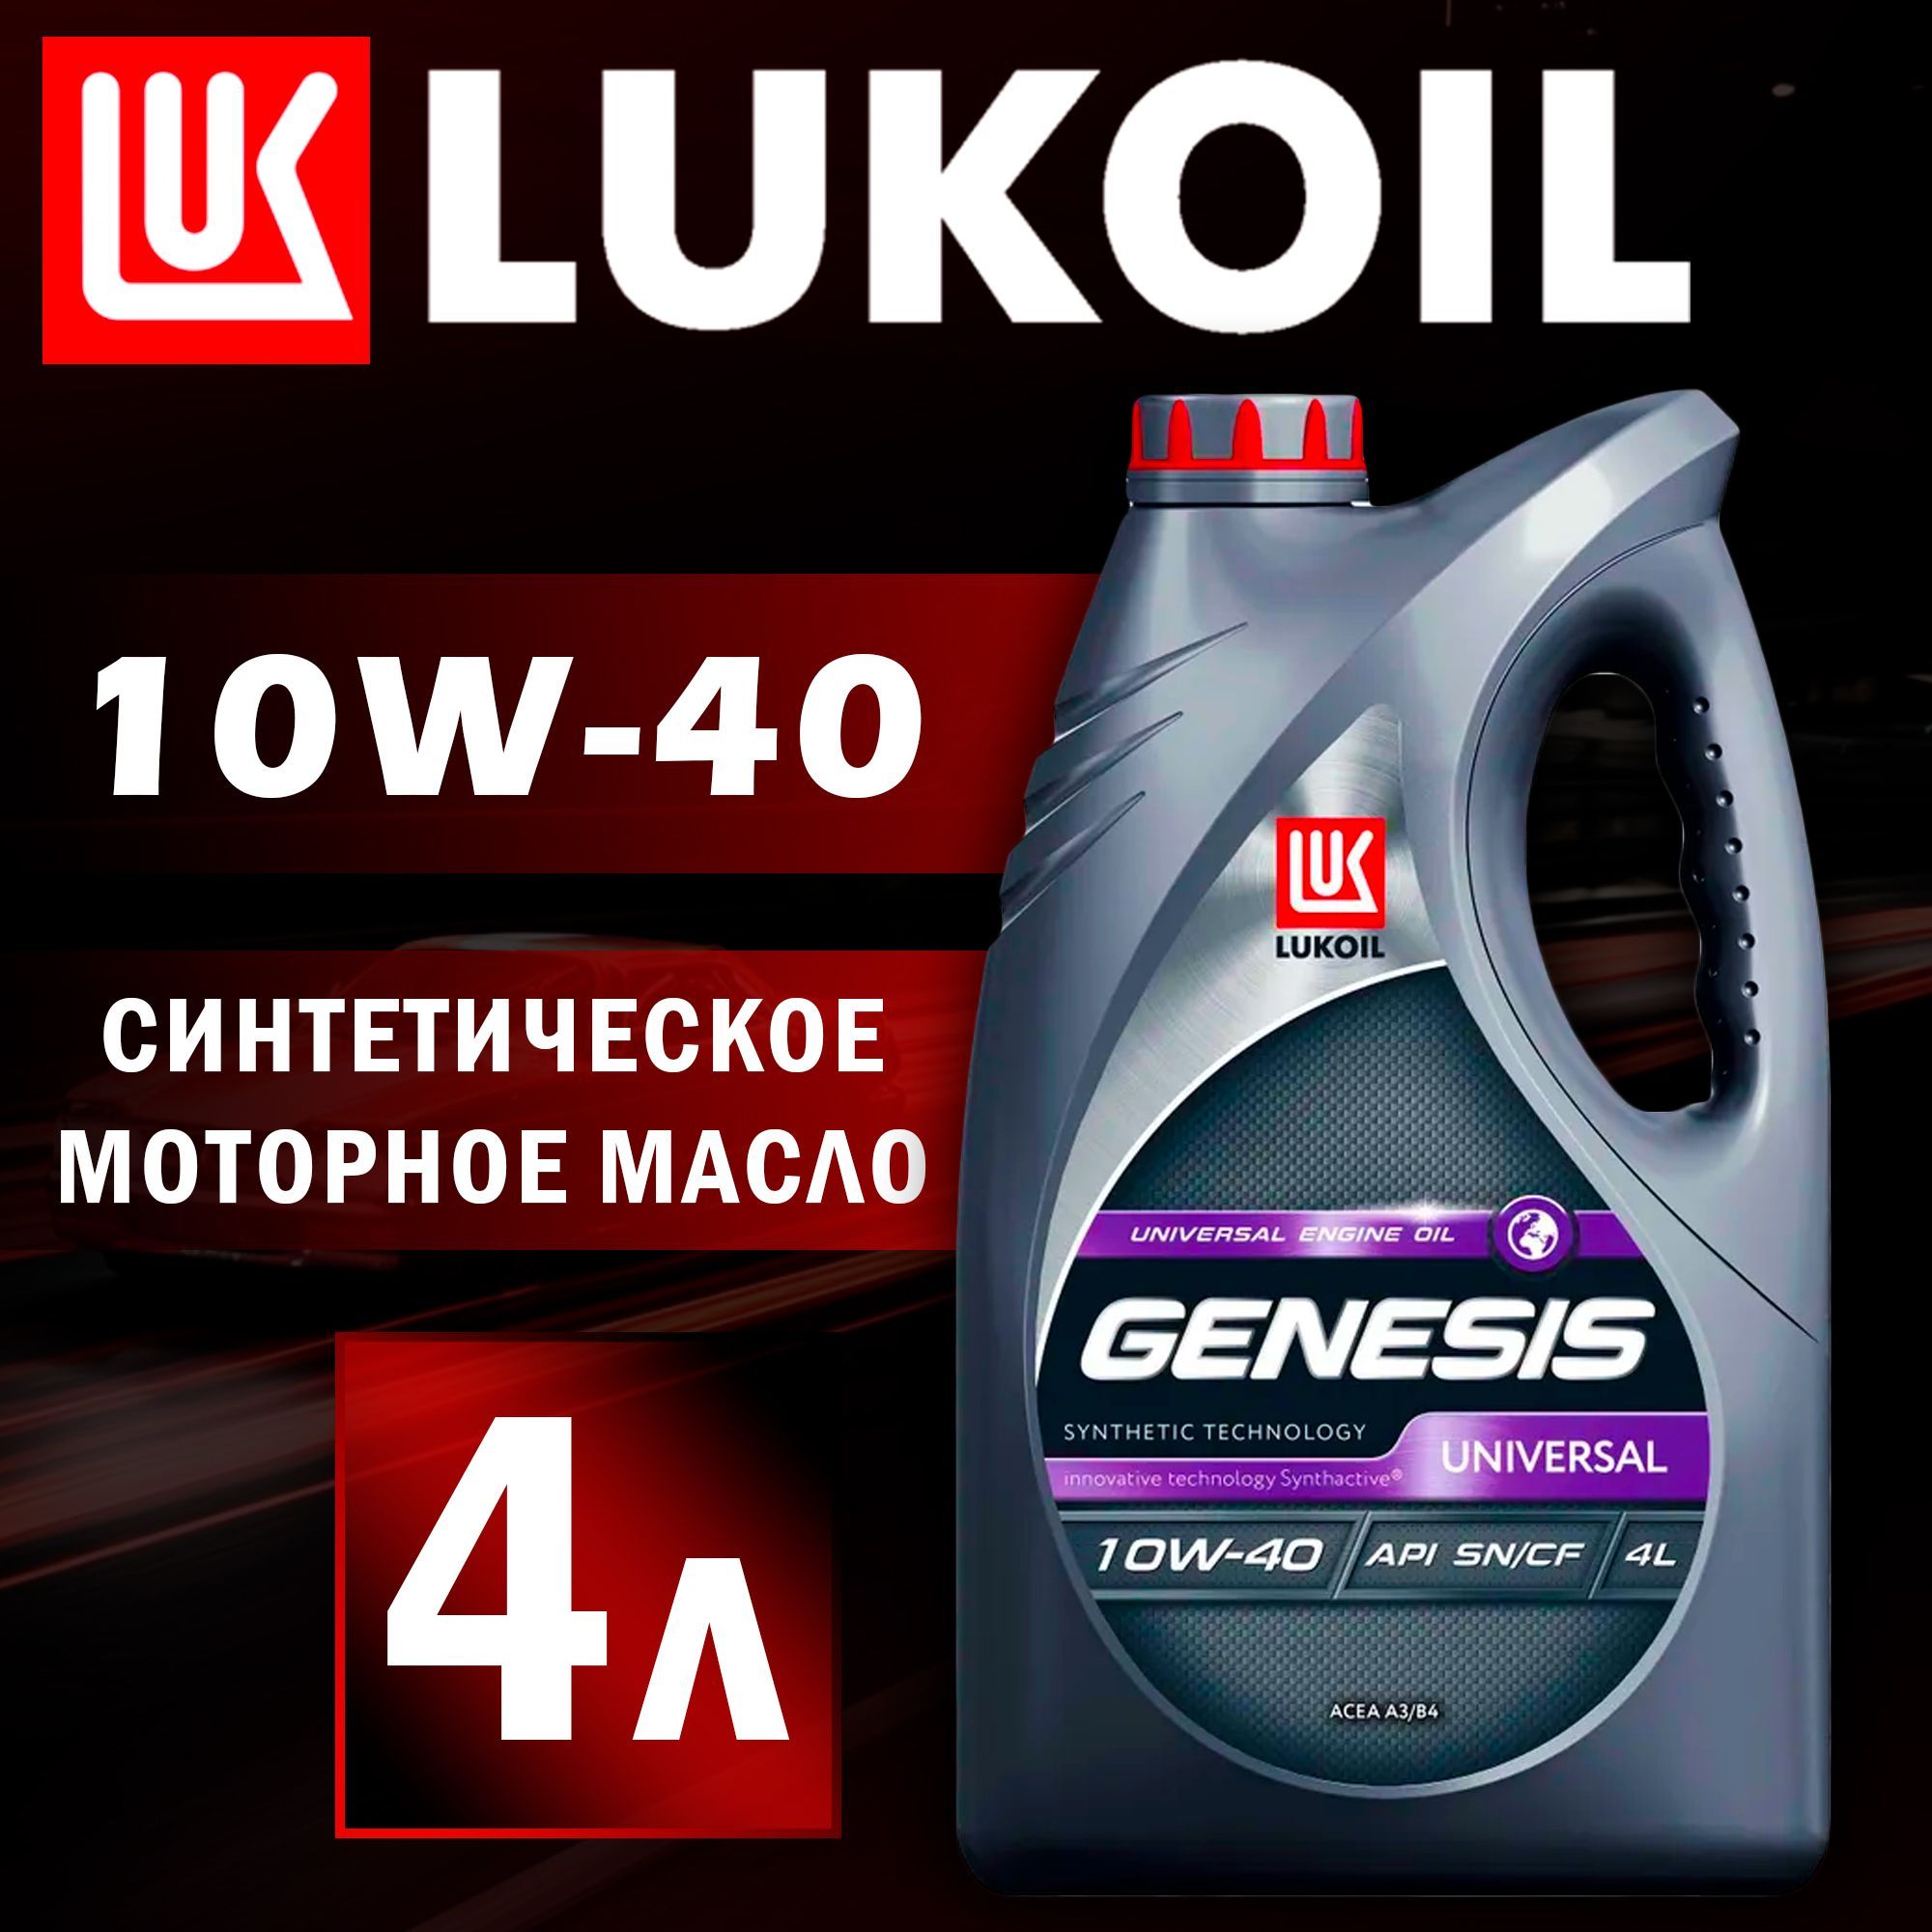 Lukoil Genesis Universal 10w-40. Масло Лукойл Генезис 10w 40. Канистра Лукойл Генезис 10в40. Лукойл Генезис 10 40. Лукойл генезис 10w40